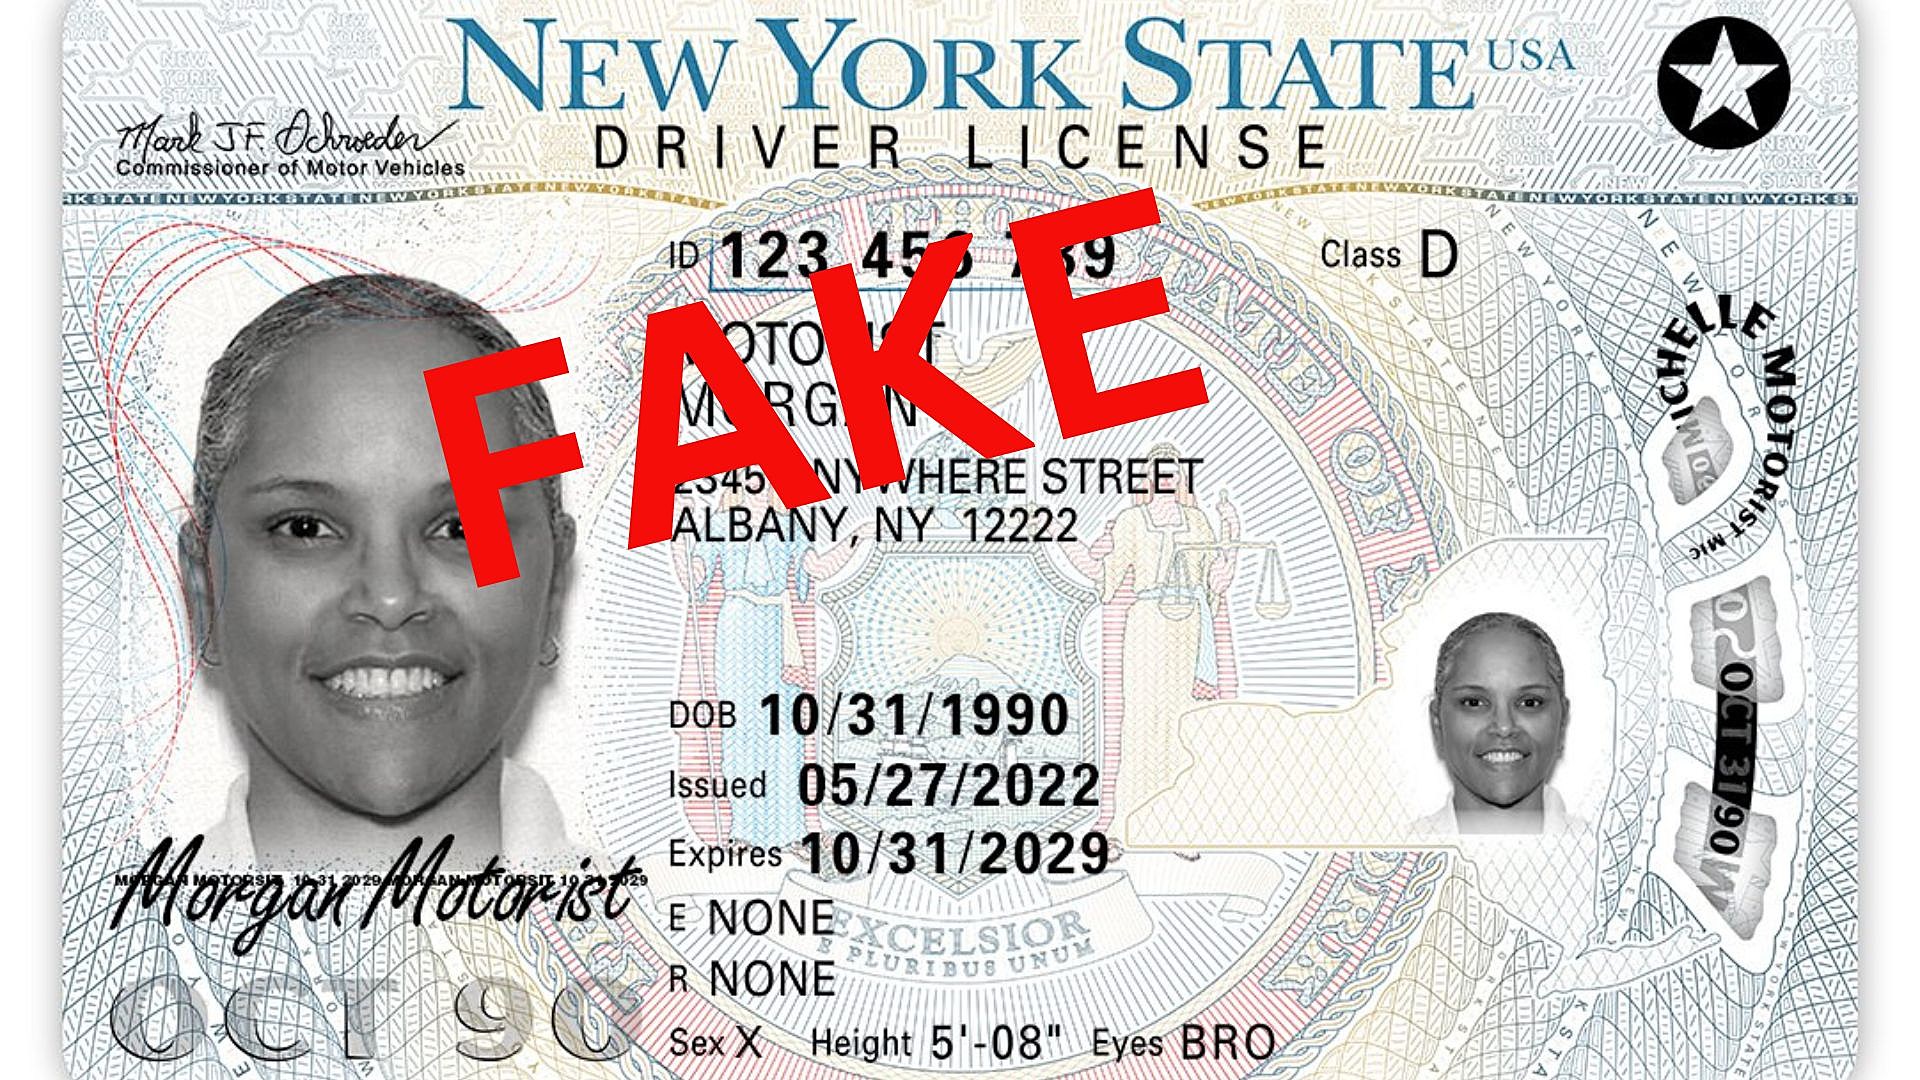 Nevada Scannable Fake Id Charges